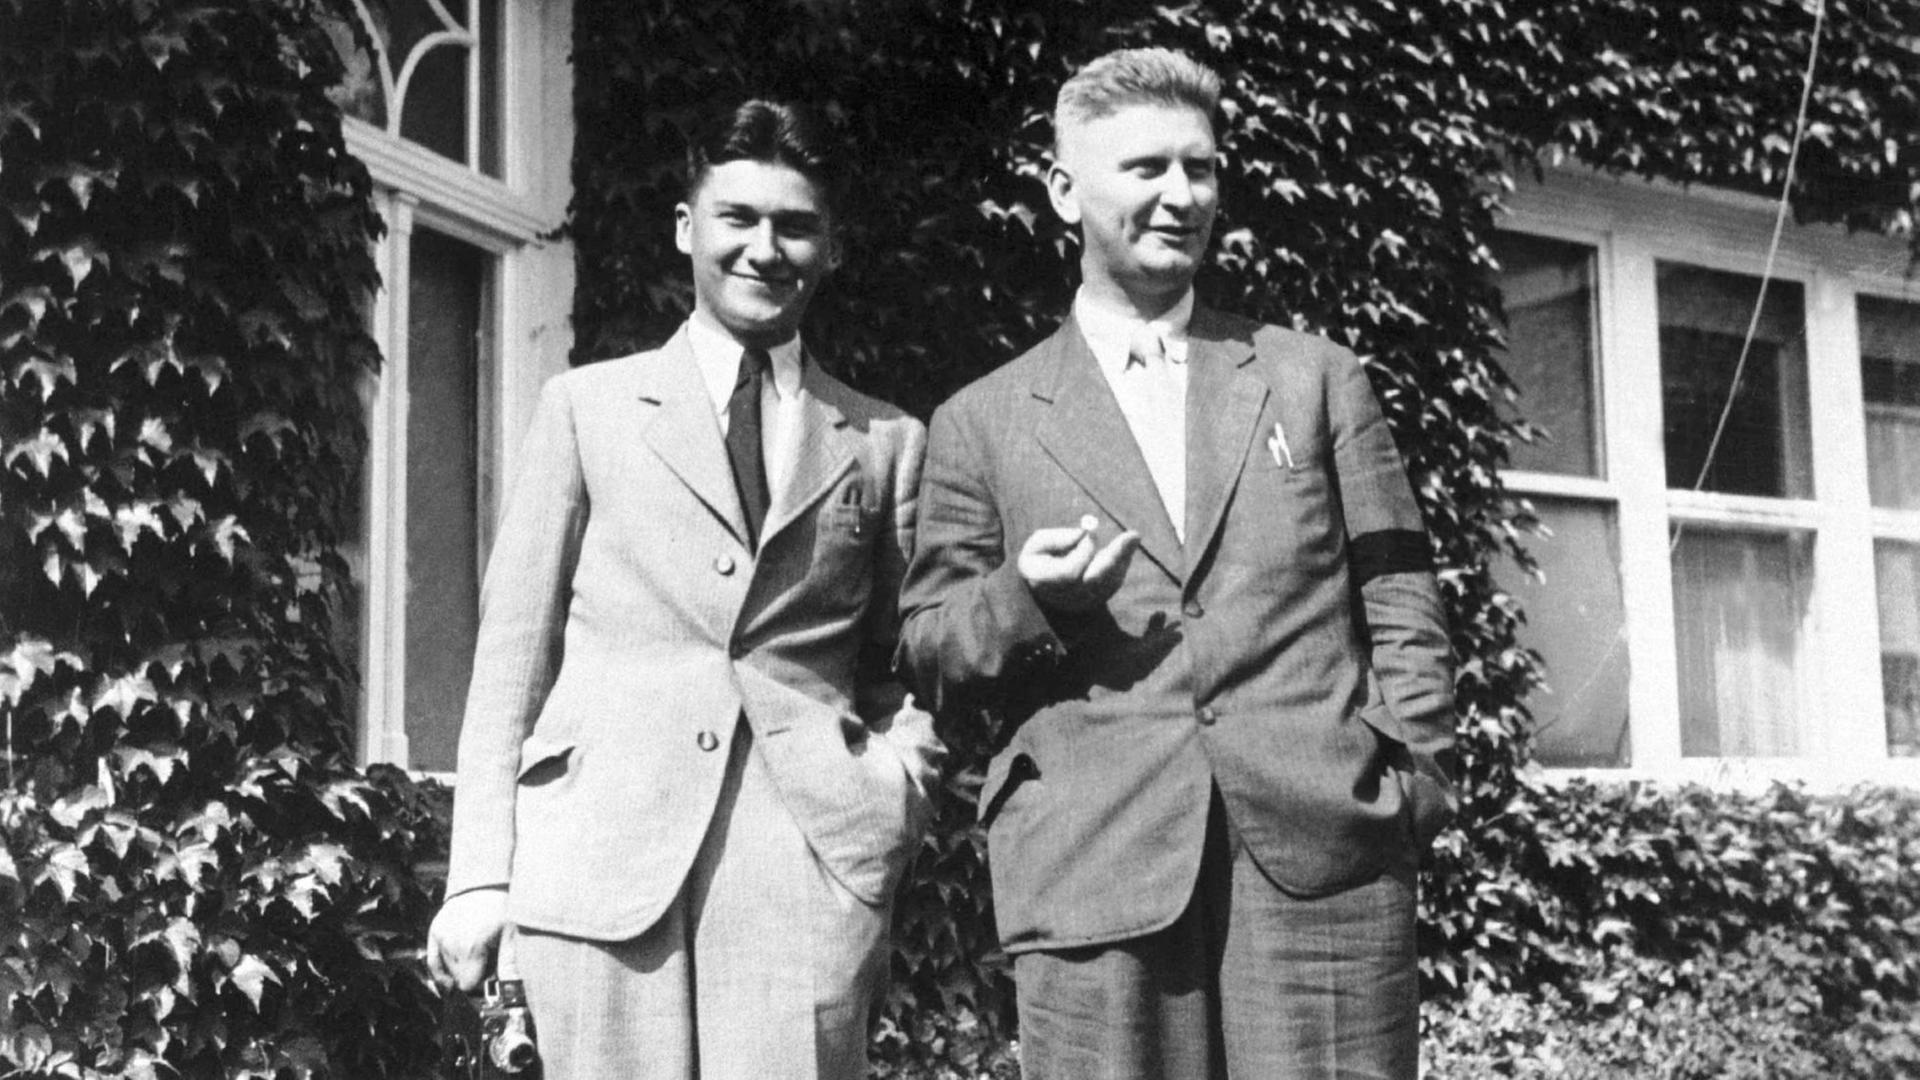 Son of Tomas Bata, Tomas Bata jr, left, and his uncle J.A. Bata pictured shortly after the death of Tomas Bata sr. in 1932 in Zlin Bata company founded by Tomas Bata and his family is one of the most well known Czech entreprises. The Bata shoe company expanded to to more then countries worldwide. Foto: CTK +++(c) dpa - Report+++ |